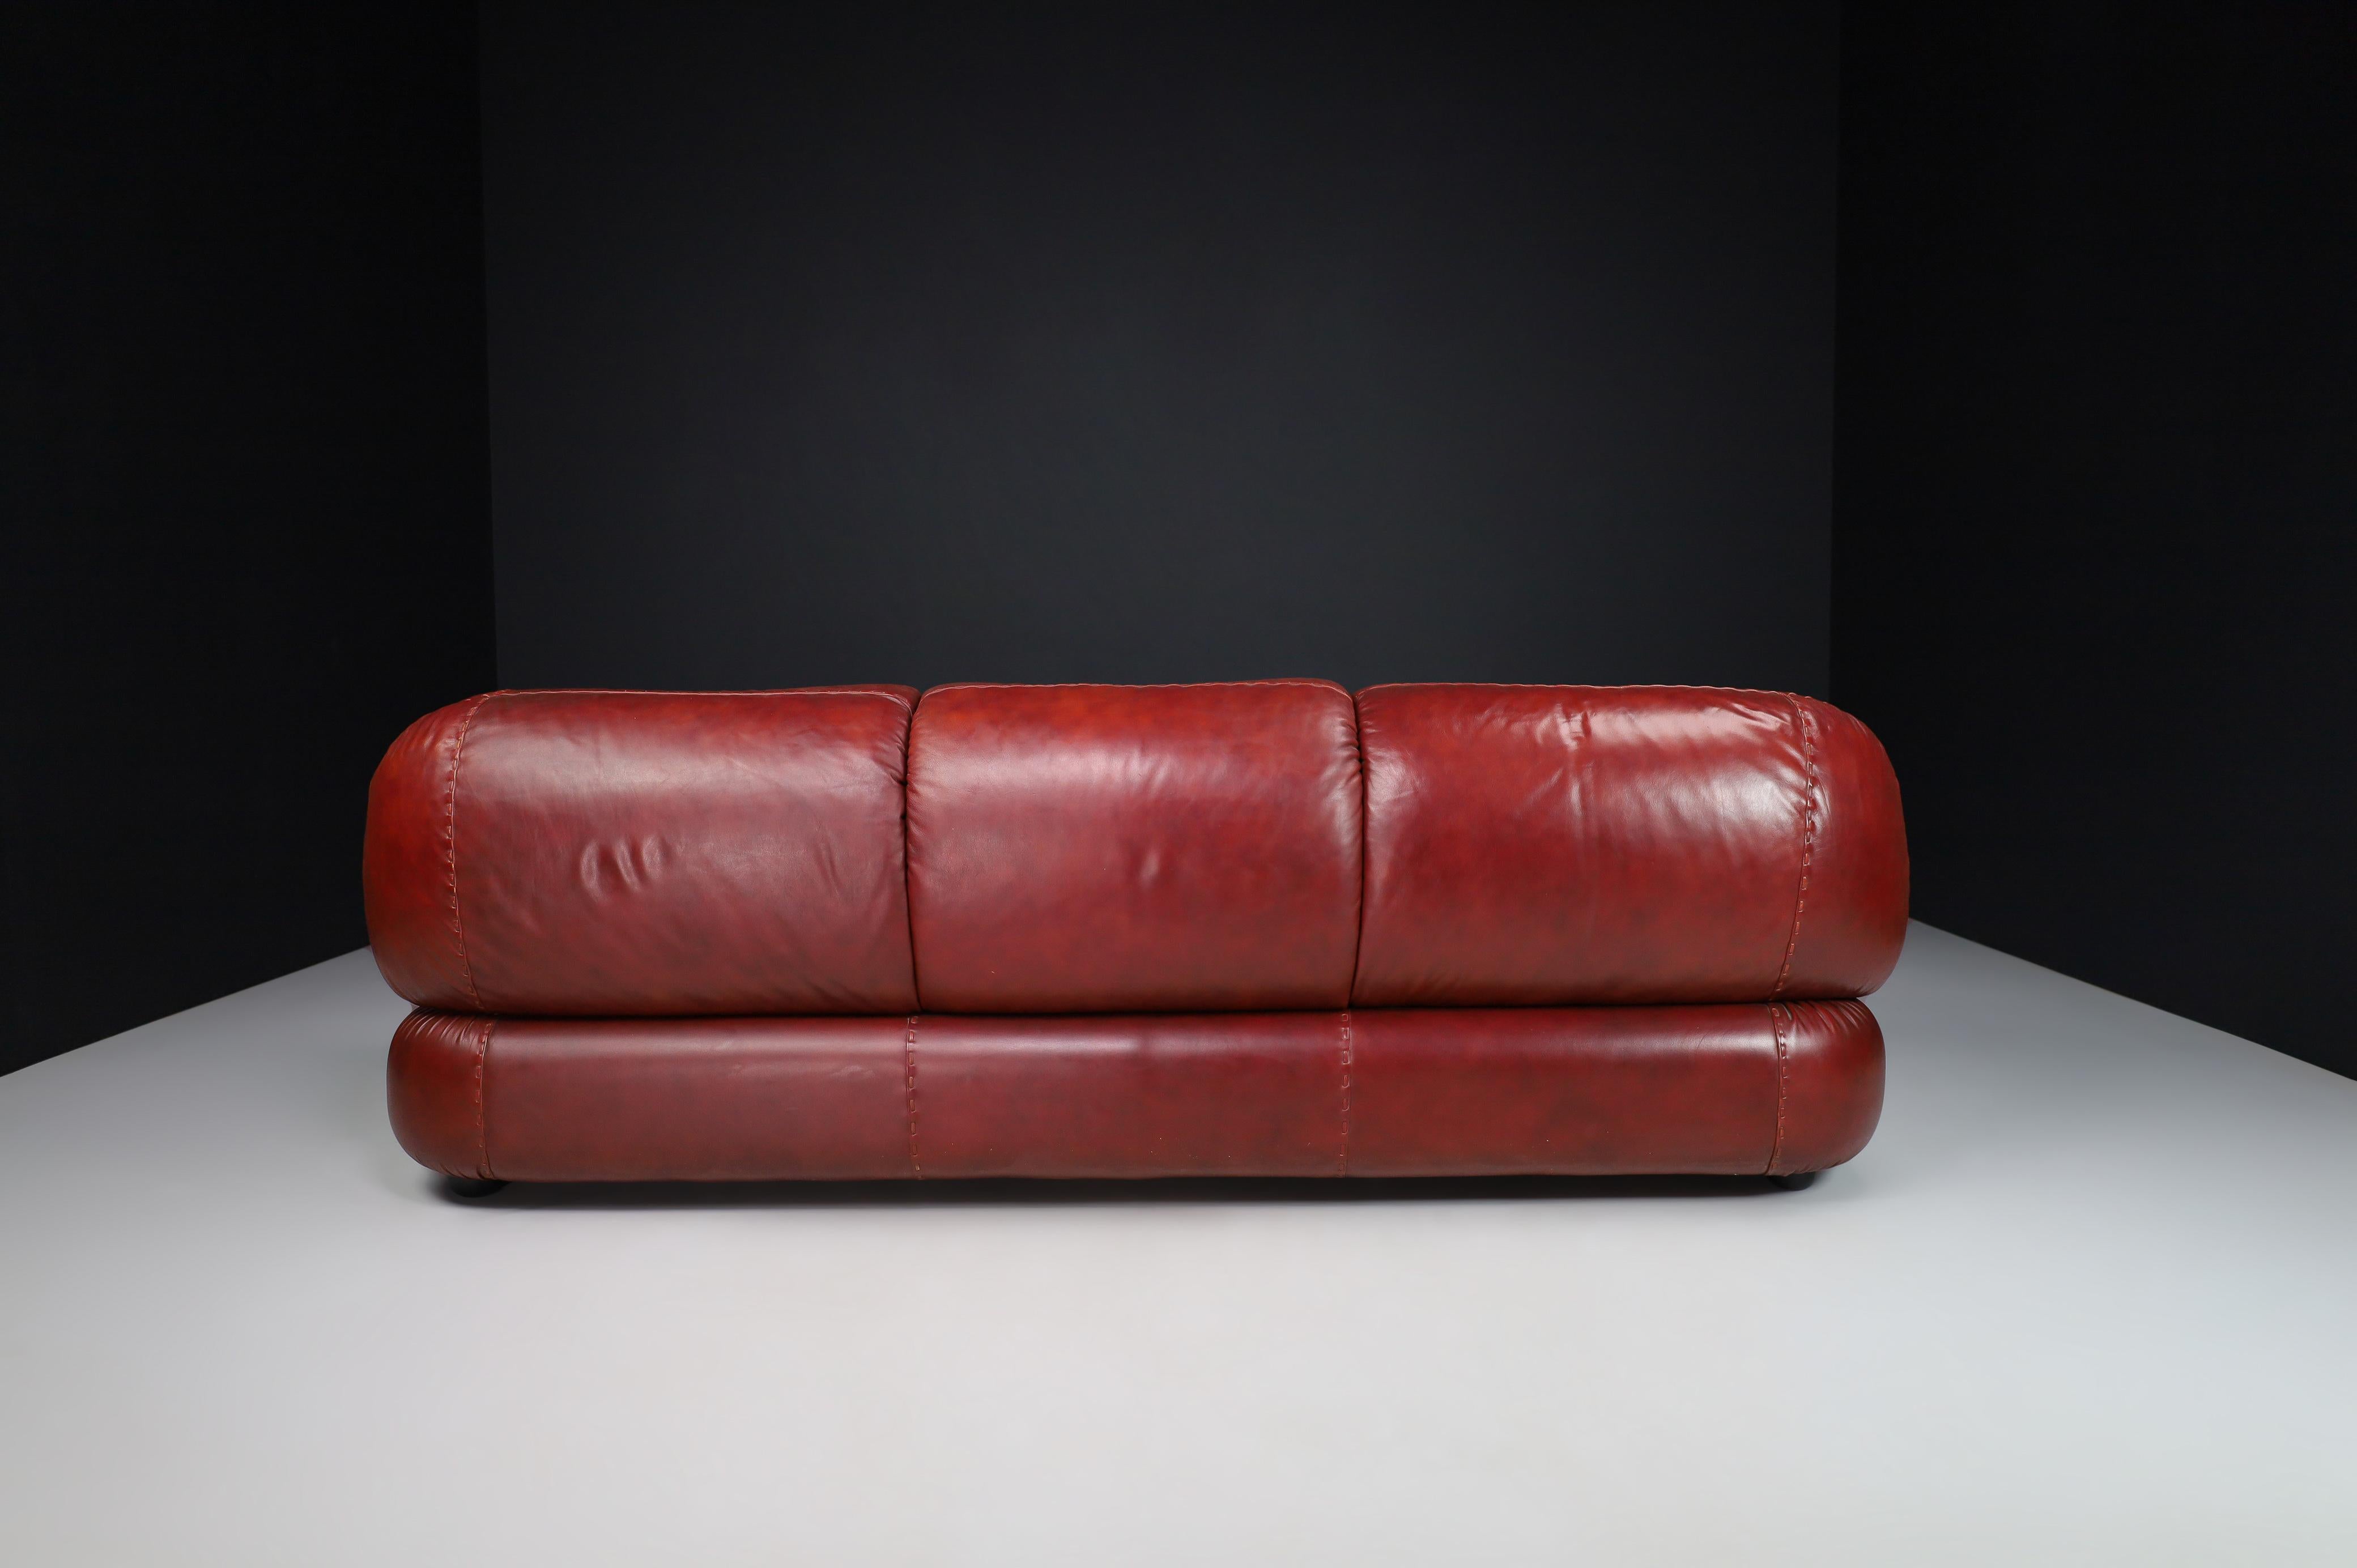 Large Lounge Sofa in Bordeaux Leather by Sapporo for Mobil Girgi, Italy, 1970 For Sale 3